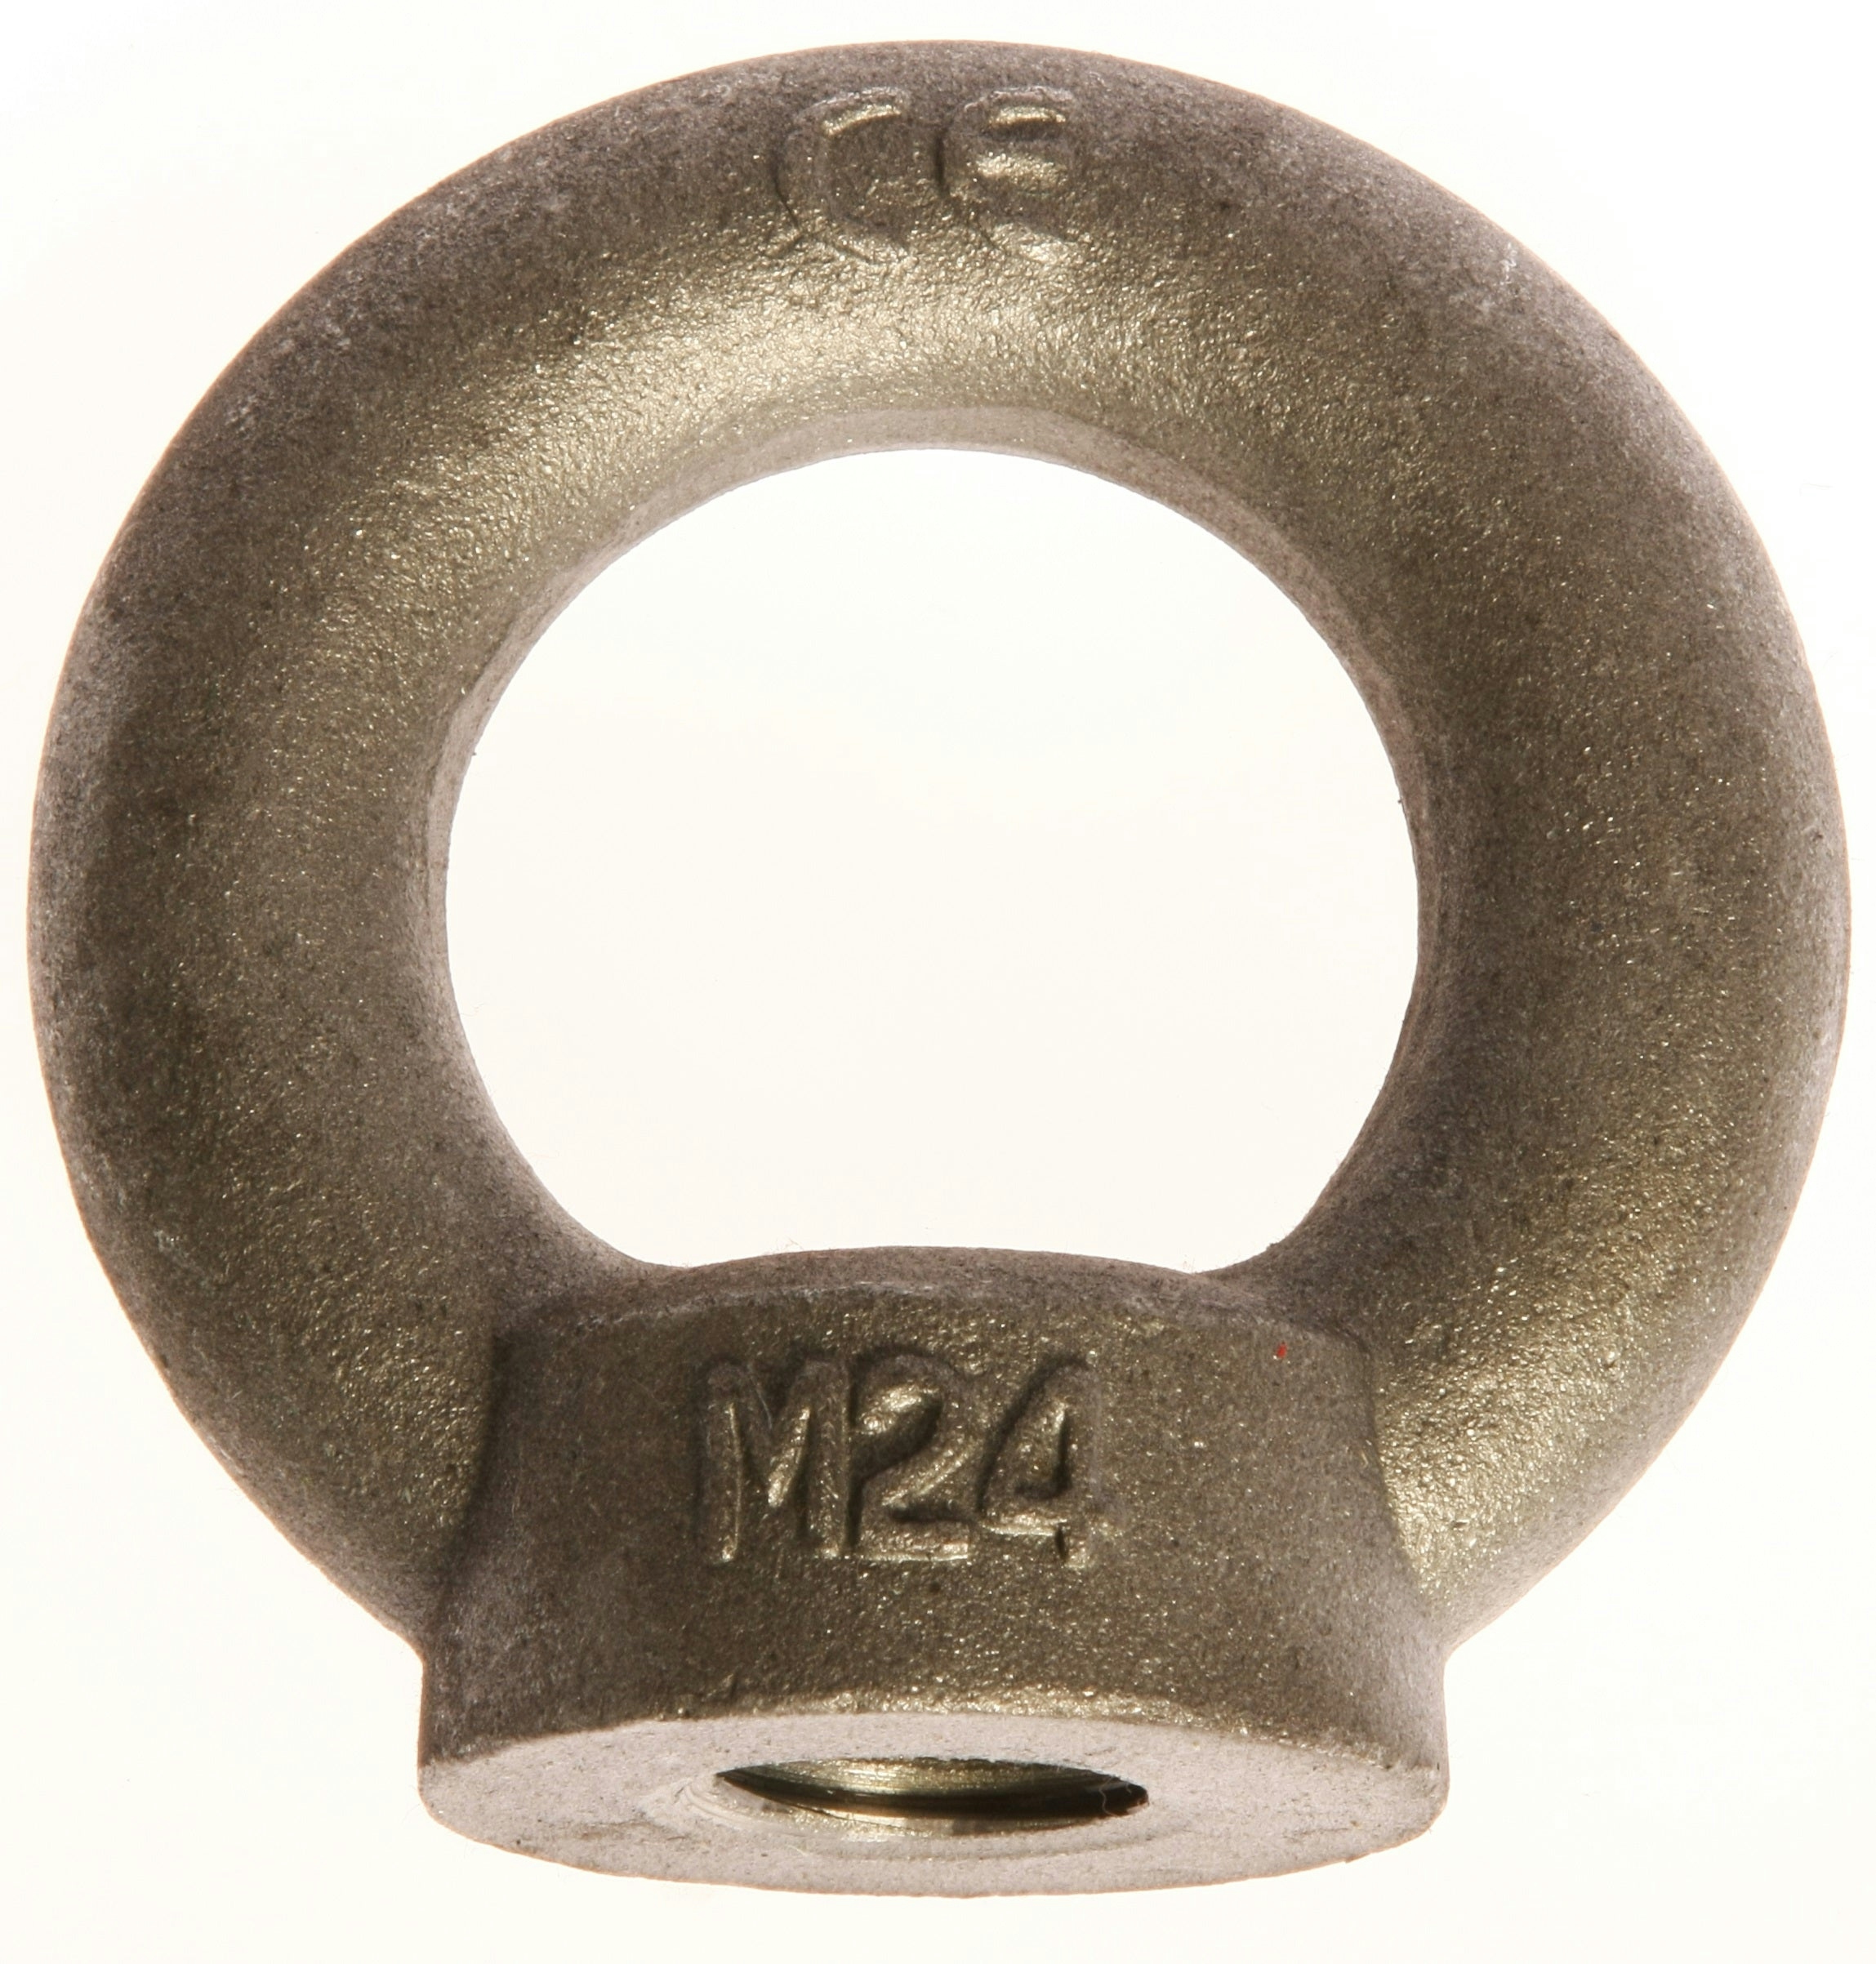 Image of our DIN 582 Eye Nut product